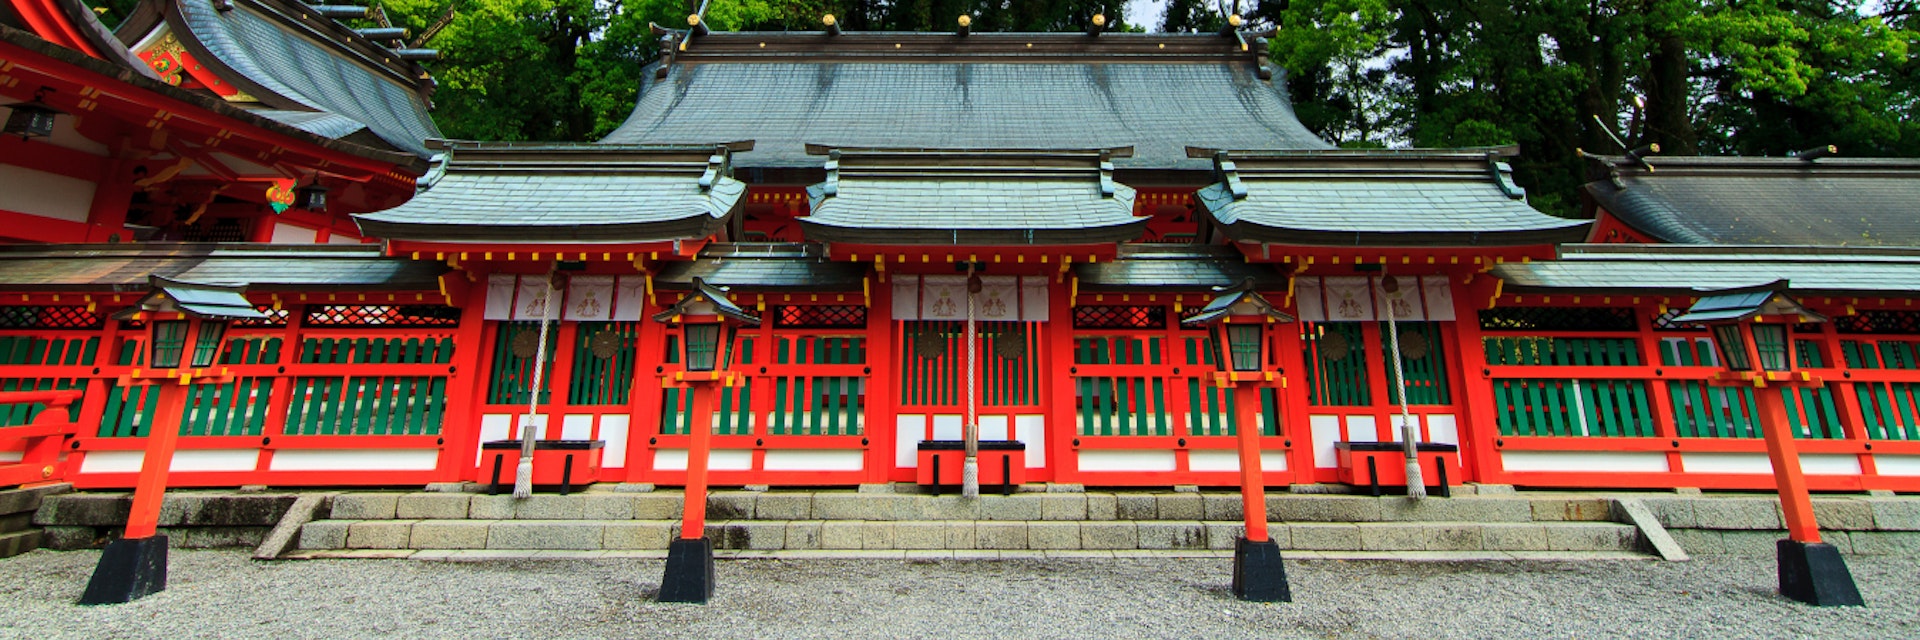 Kumano Hayatama Taisha, Shingu, Wakayama Prefecture, Japan; Shutterstock ID 681671041; Your name (First / Last): Laura Crawford; GL account no.: 65050; Netsuite department name: Online Editorial; Full Product or Project name including edition: Kii Peninsula page online images for BiT